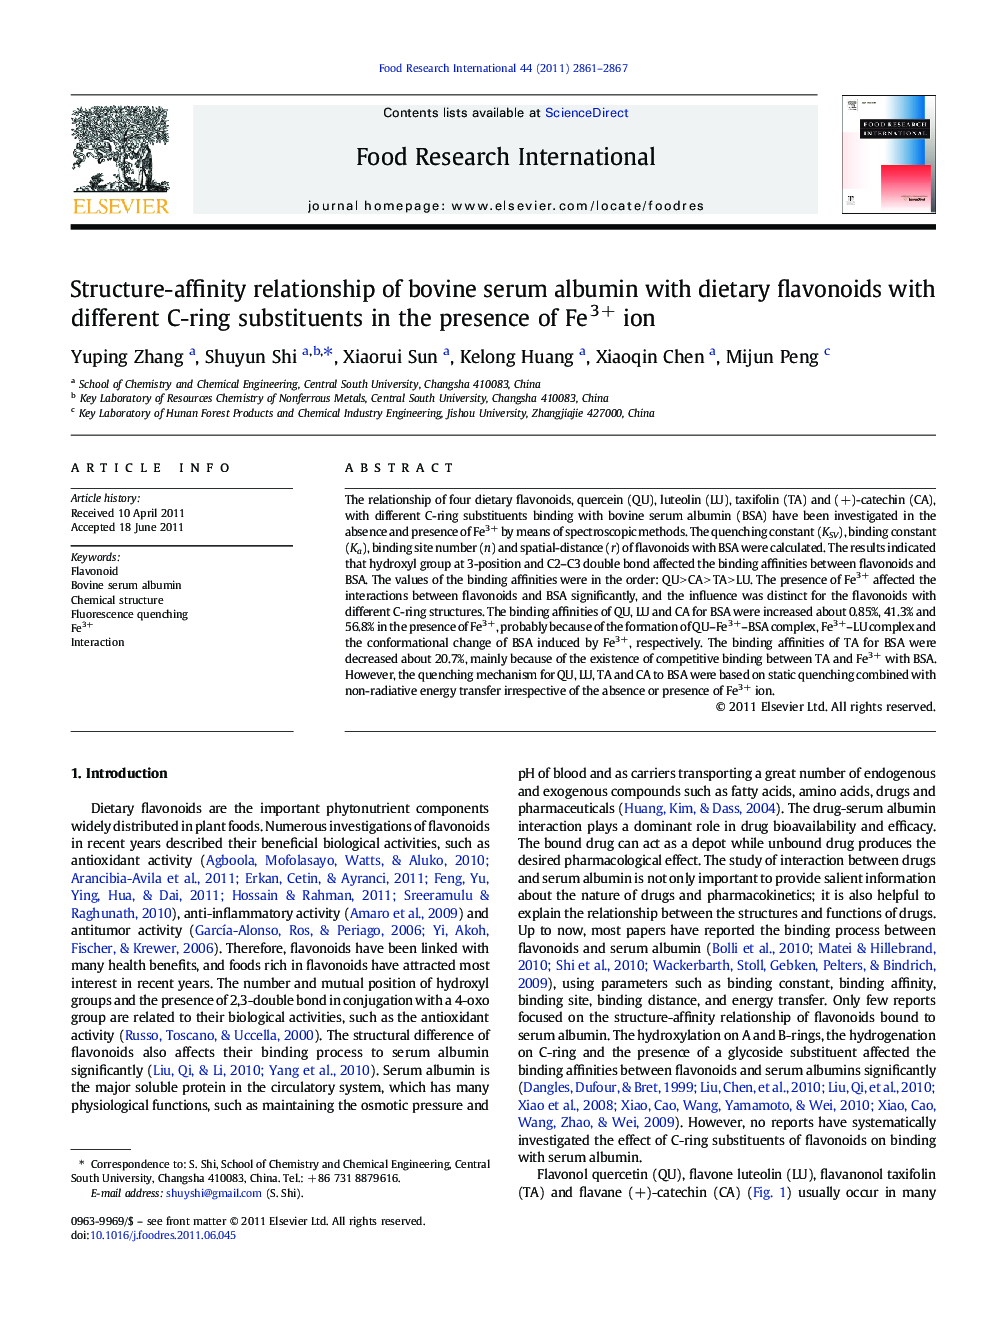 Structure-affinity relationship of bovine serum albumin with dietary flavonoids with different C-ring substituents in the presence of Fe3+ ion